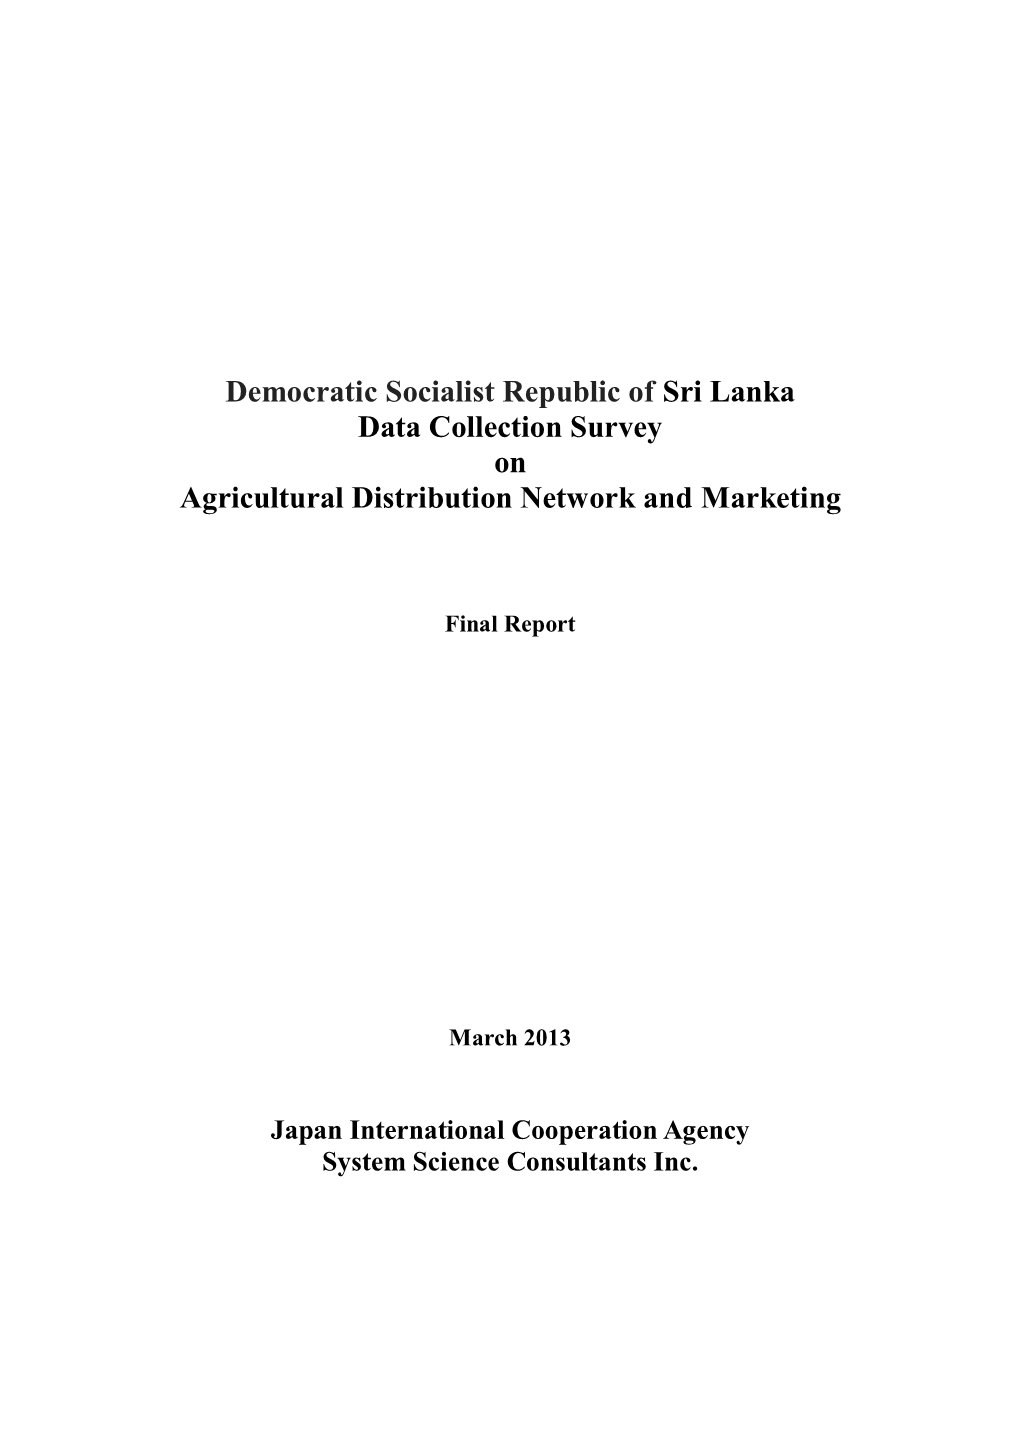 Democratic Socialist Republic of Sri Lanka Data Collection Survey on Agricultural Distribution Network and Marketing